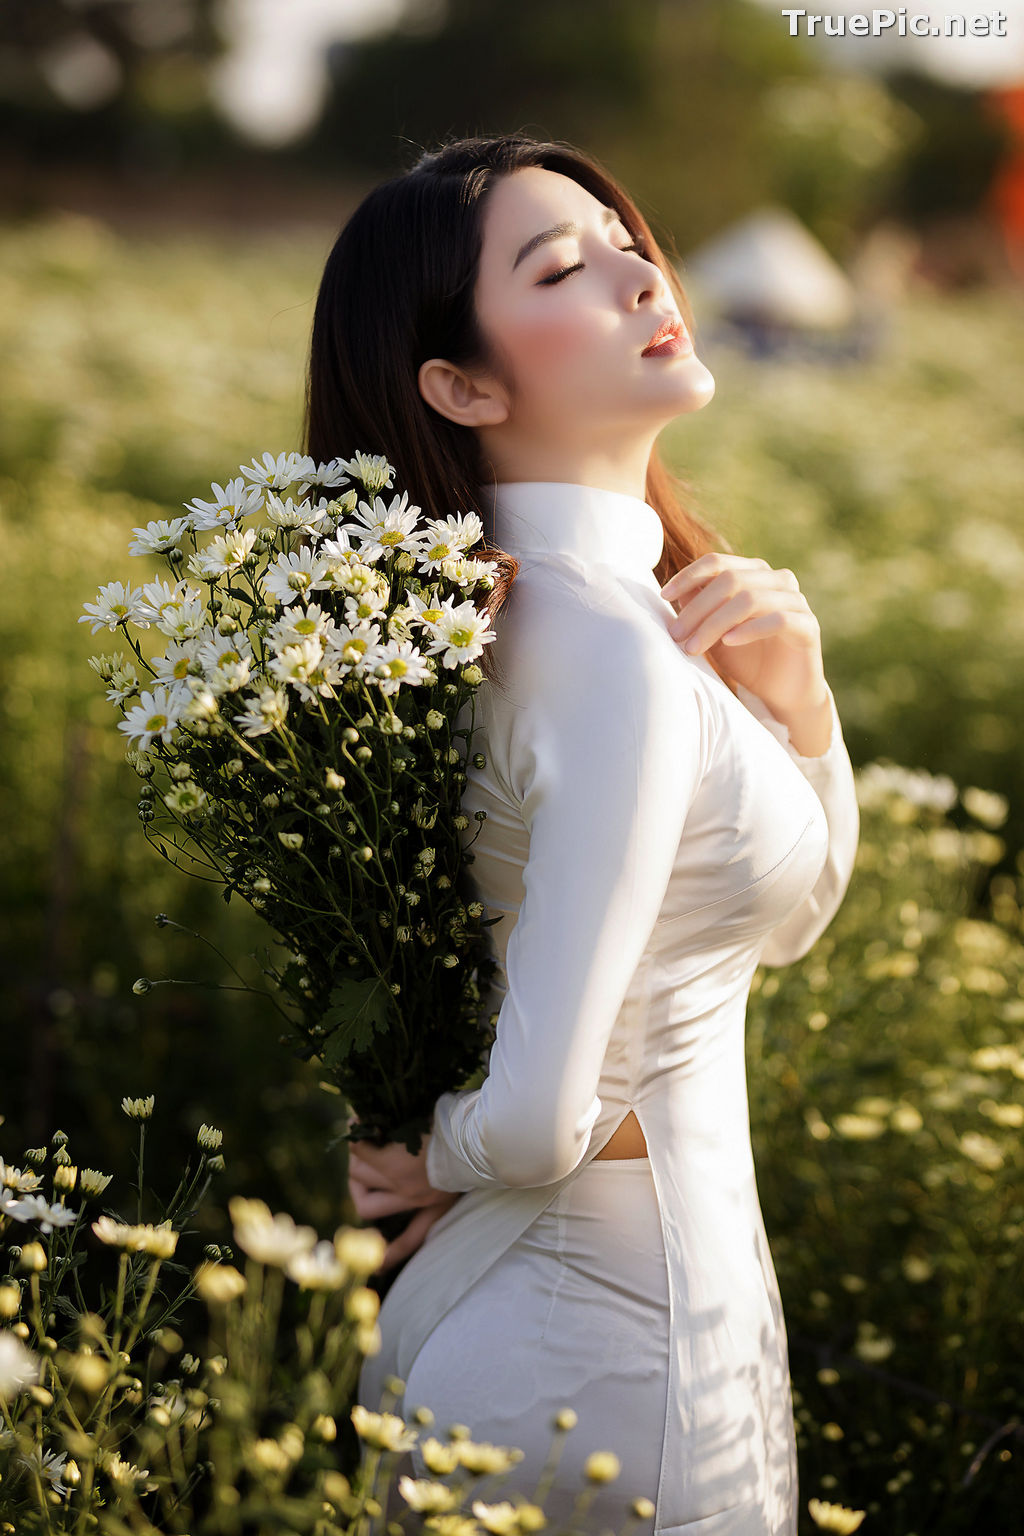 Image The Beauty of Vietnamese Girls with Traditional Dress (Ao Dai) #5 - TruePic.net - Picture-12